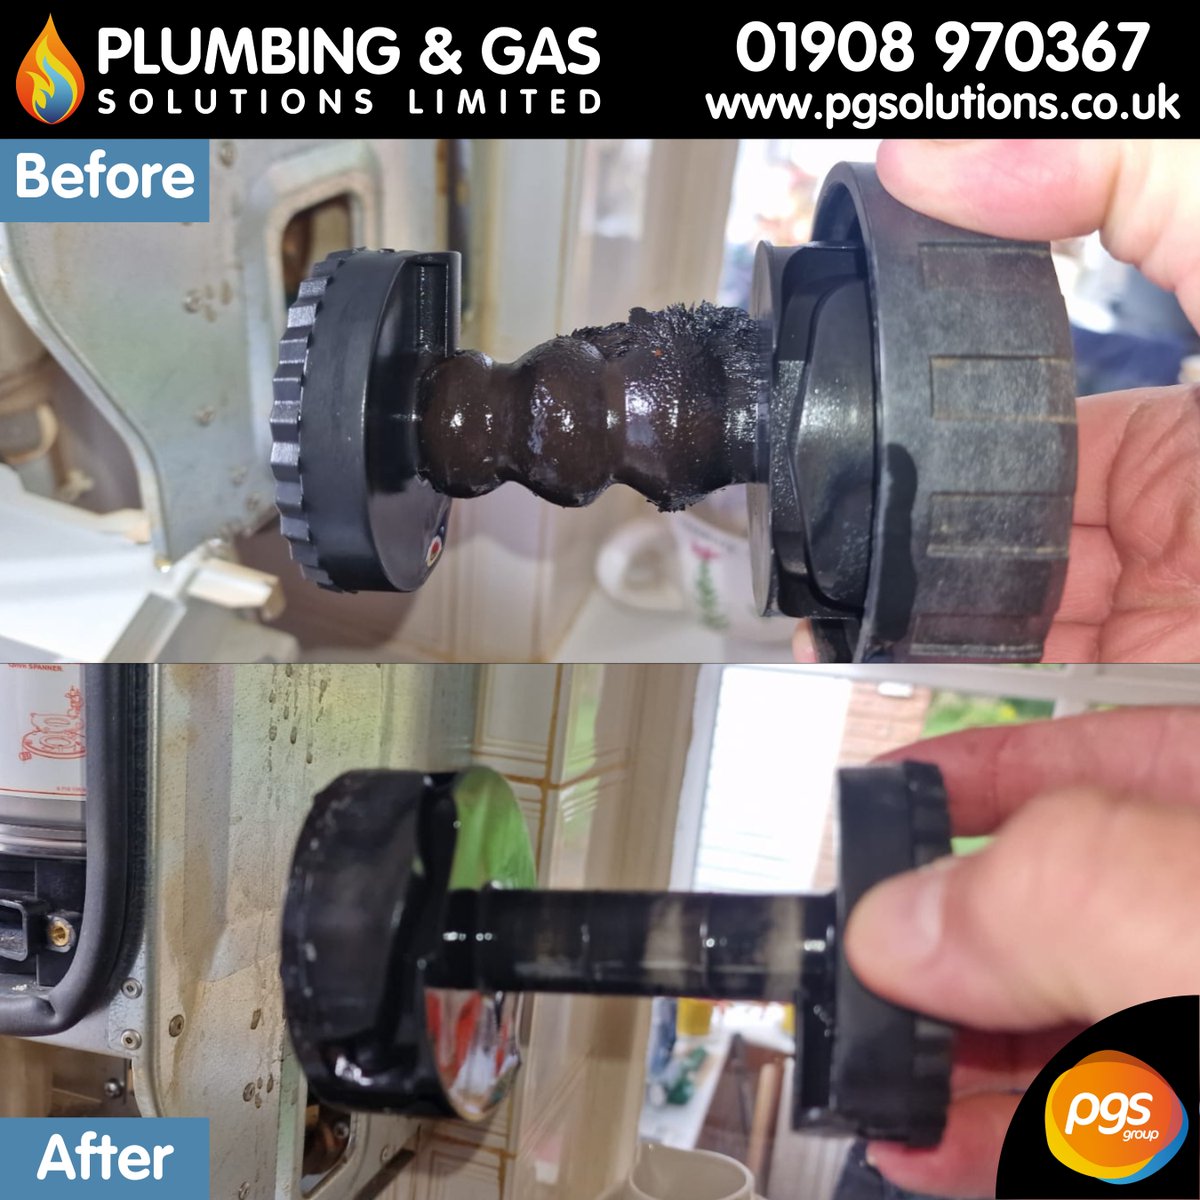 Magnetic Filters can be a key part of a heating system, as they remove iron oxide, to prevent sludge build-up. 🧲 During this recent service, we cleaned the magnetic filter to remove the build-up and then refitted it into the system again. 🧽 01908 970367 📞 #Plumbing #Heating